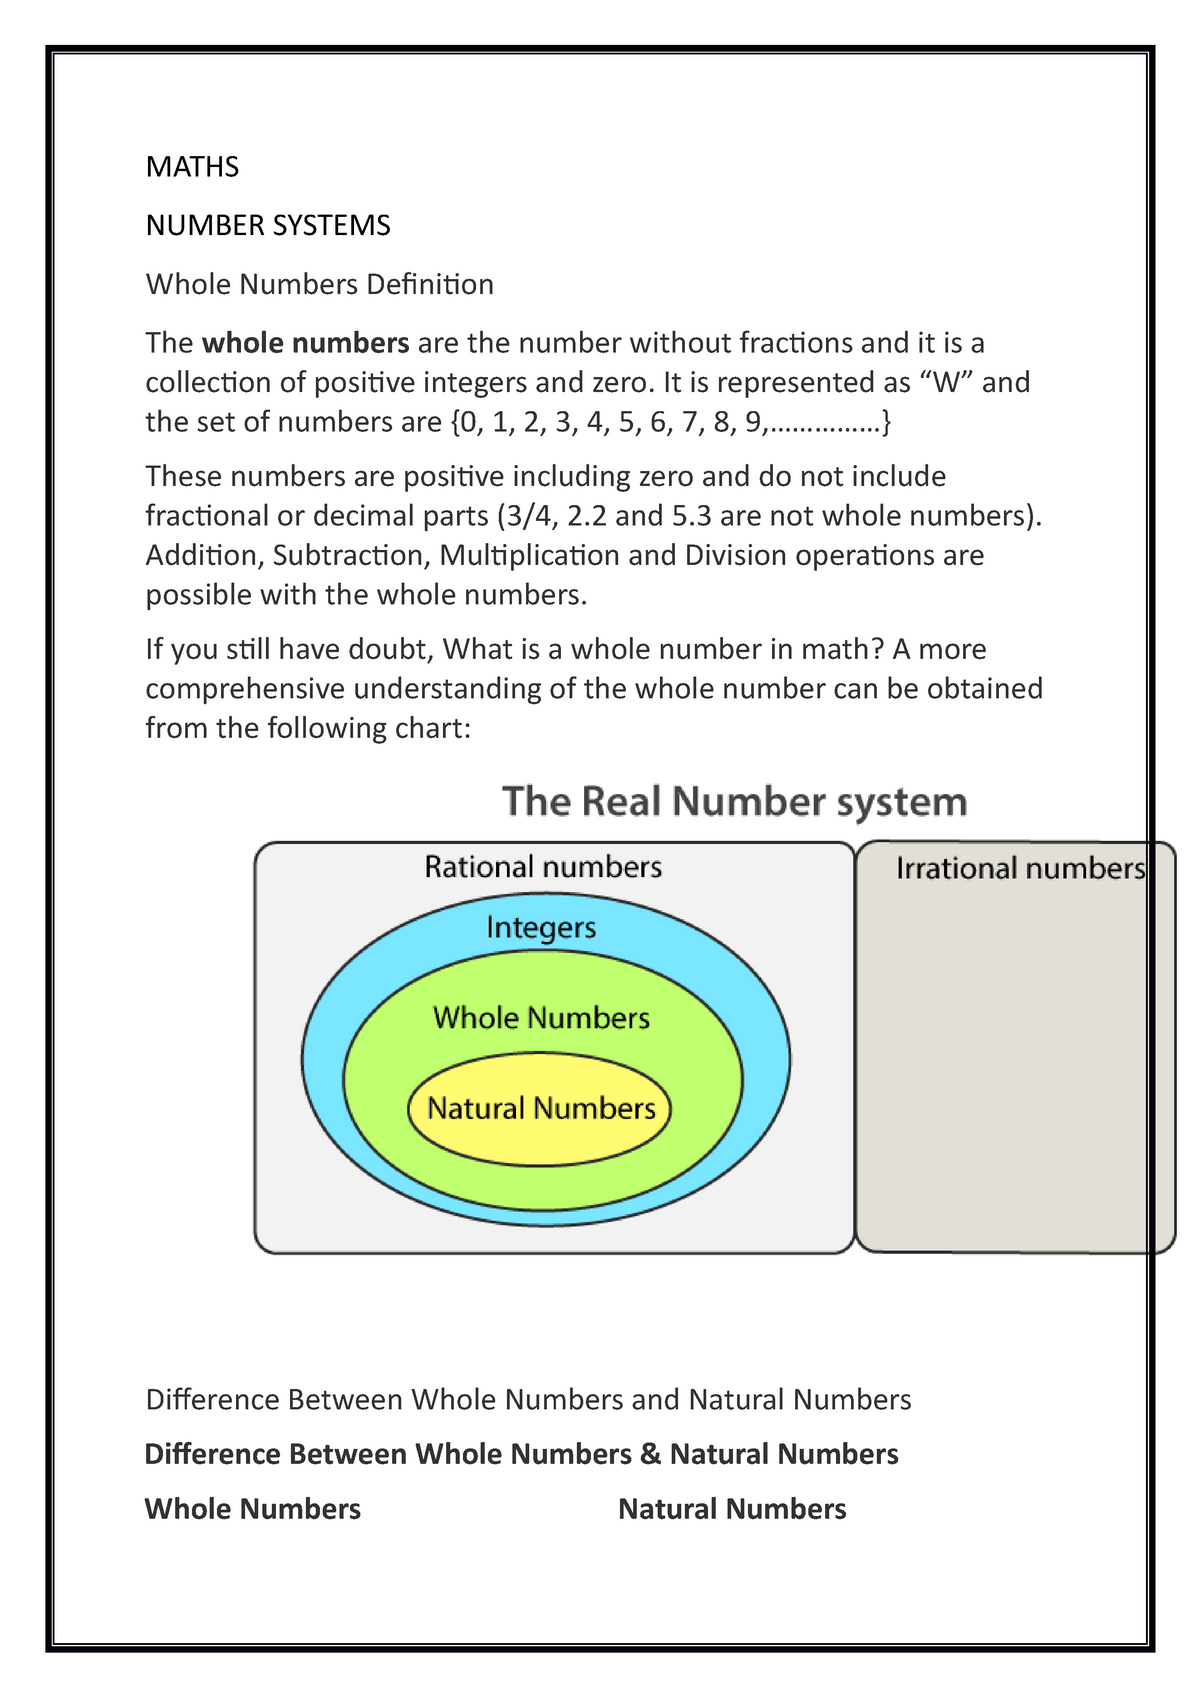 maths-note-maths-number-systems-whole-numbers-definition-the-whole